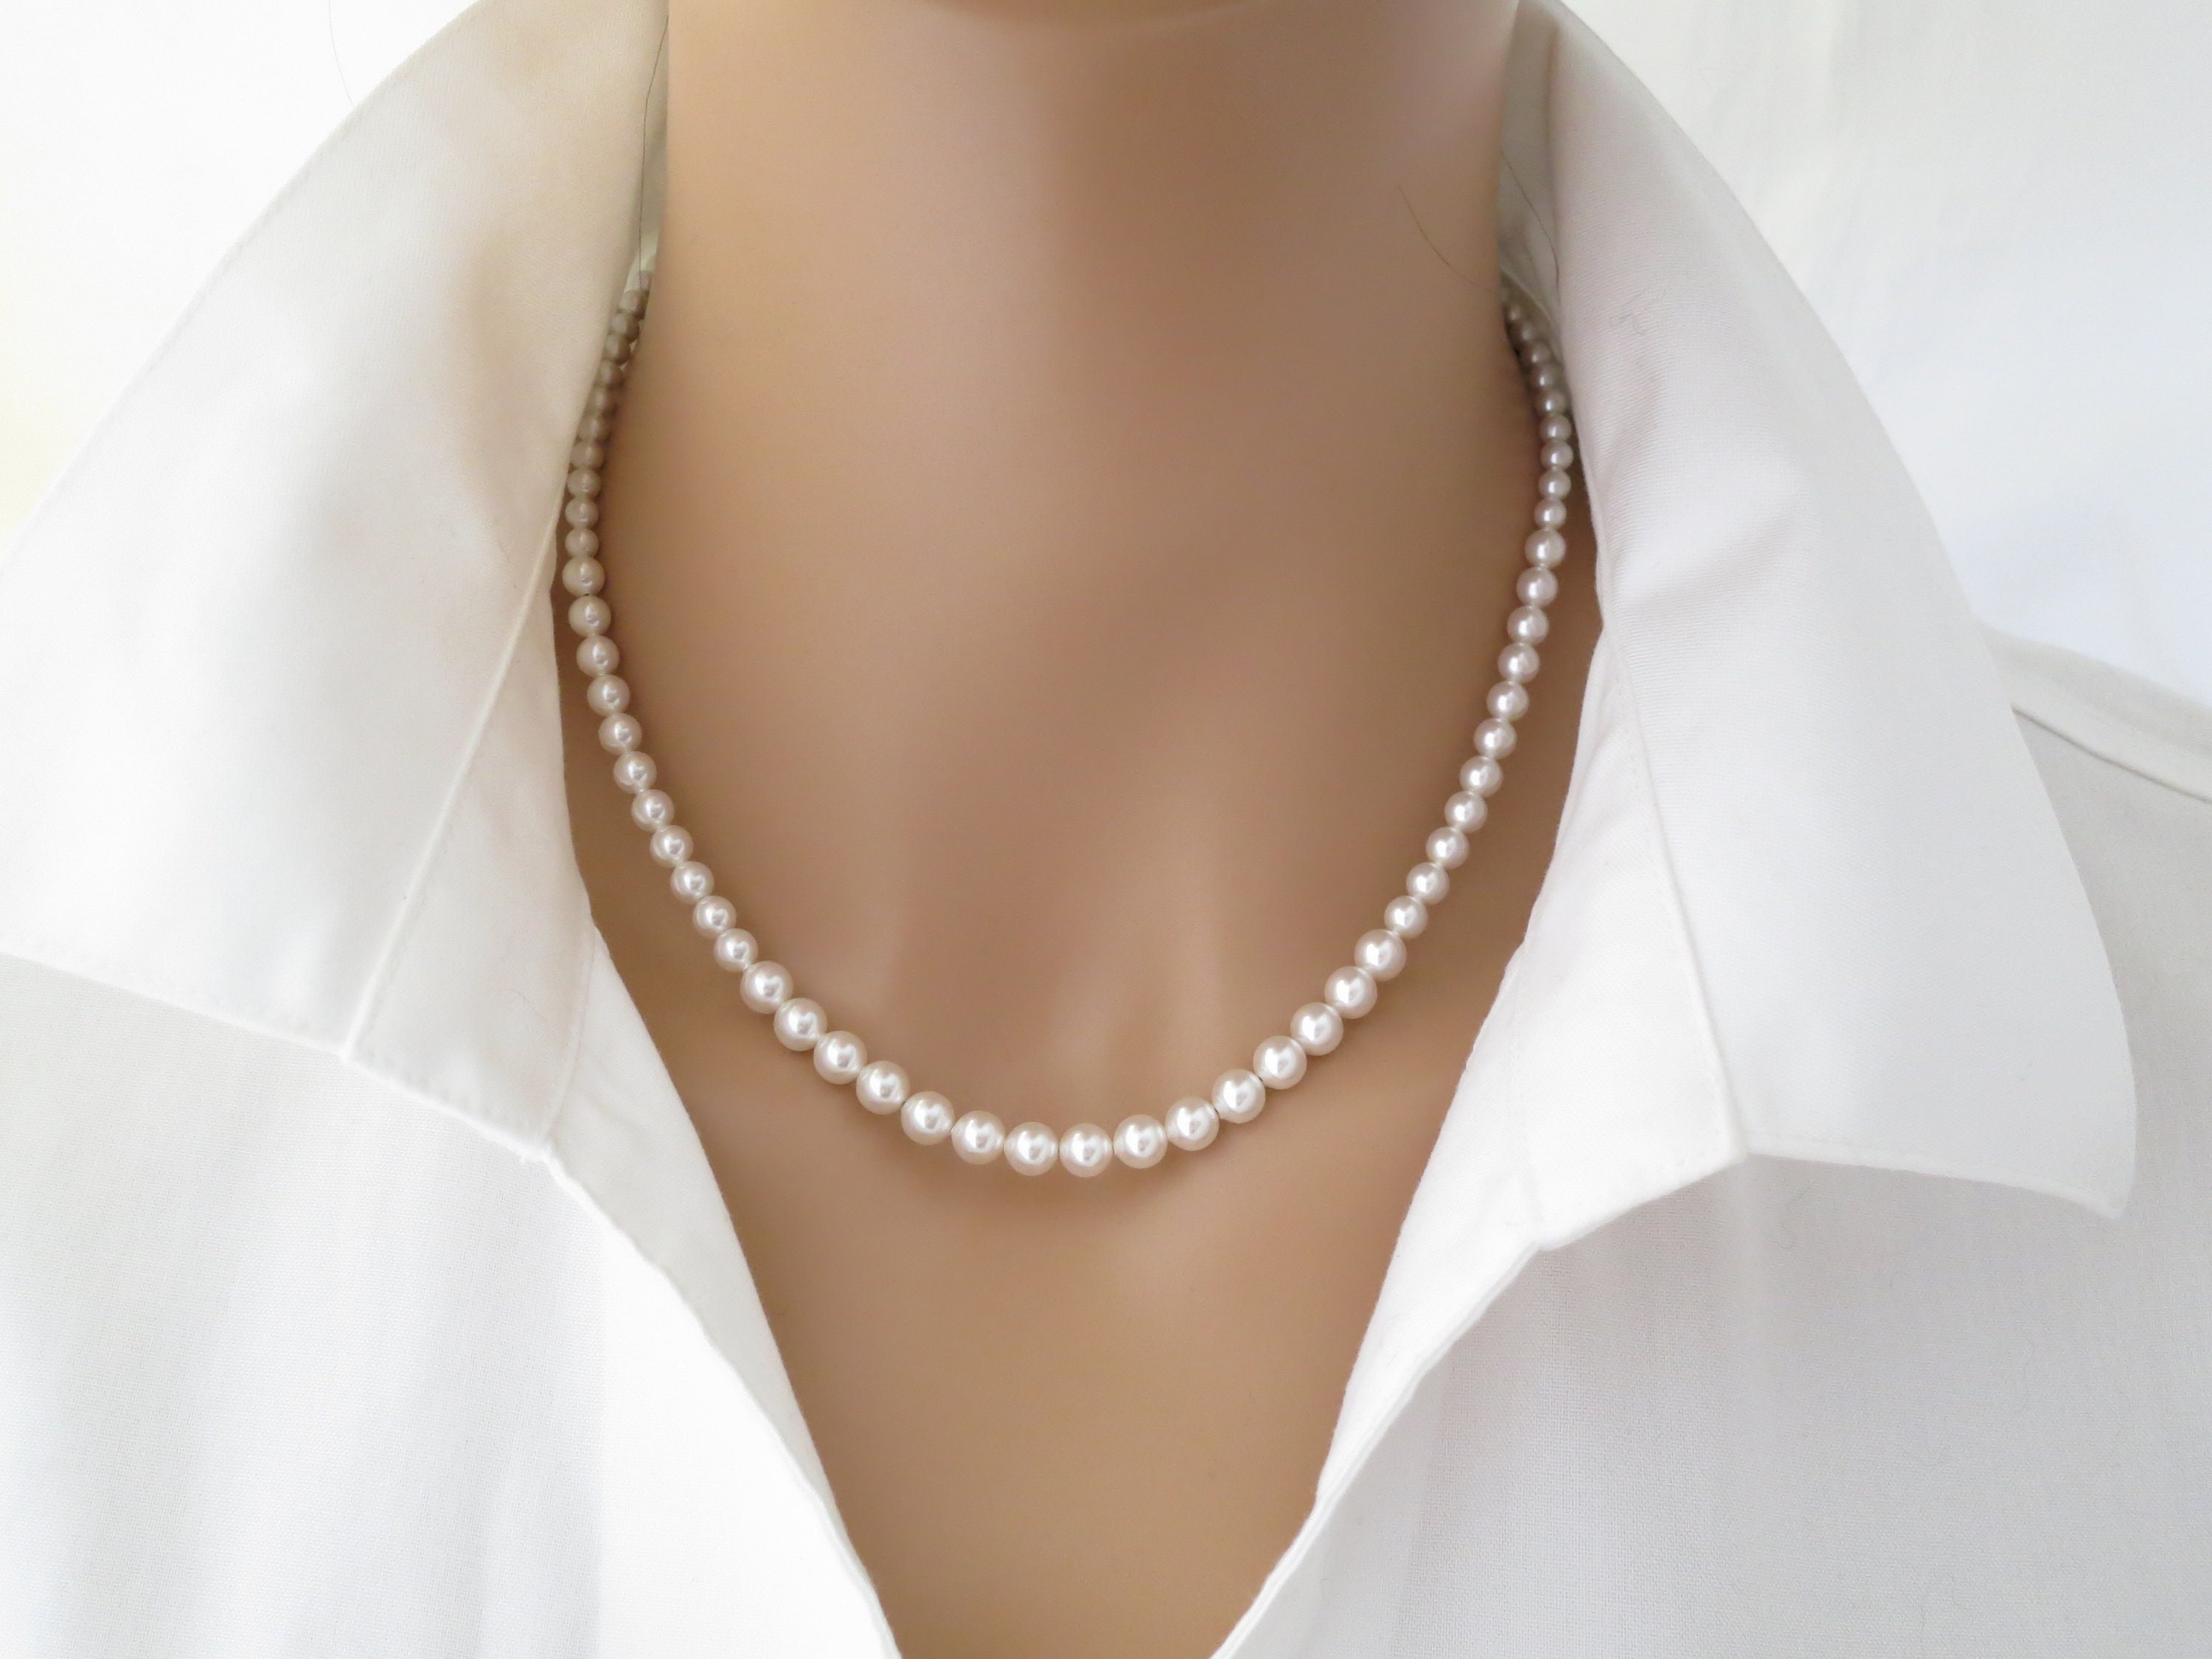 Hipwope 6/8 mm Pearl Necklace For Men Faux Pearl Necklace Men'sNecklaces  16/18/20/22/24 inch Length Pearl Choker Necklace White Pearl Necklace Men  Jewelry | Amazon.com